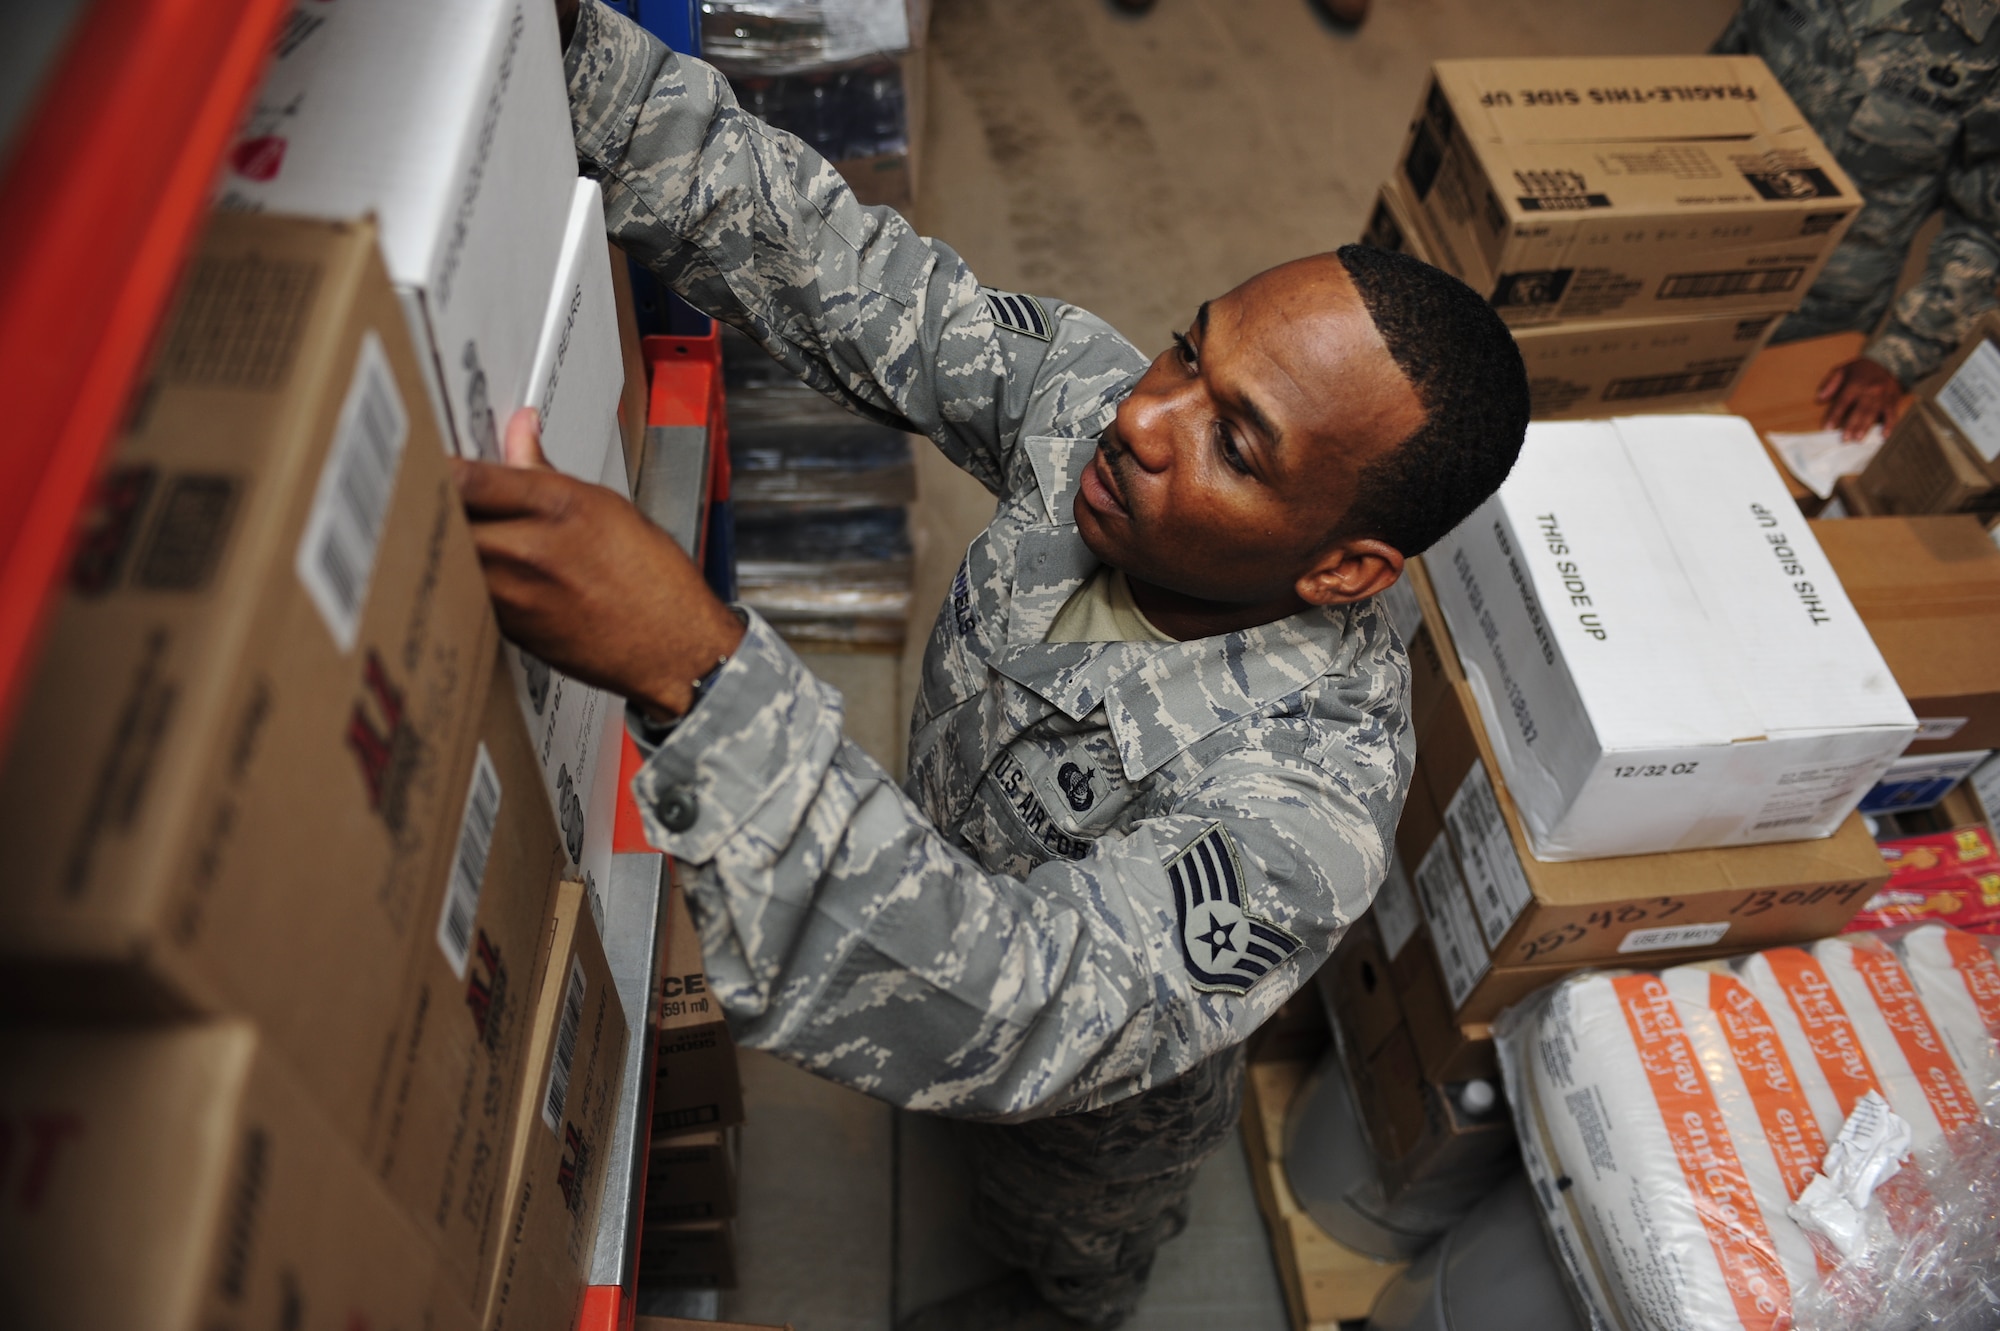 SOUTHWEST ASIA -Staff Sgt. Marvin Daniels, 380th Expeditionary Force Support Squadron, restocks food supplies in the flight line storage room Aug. 21. Sergeant Daniels is deployed from the 187th Fighter Wing, and grew up in Montgomery, Ala. (U.S. Air Force photo/Tech. Sgt. Charles Larkin Sr)